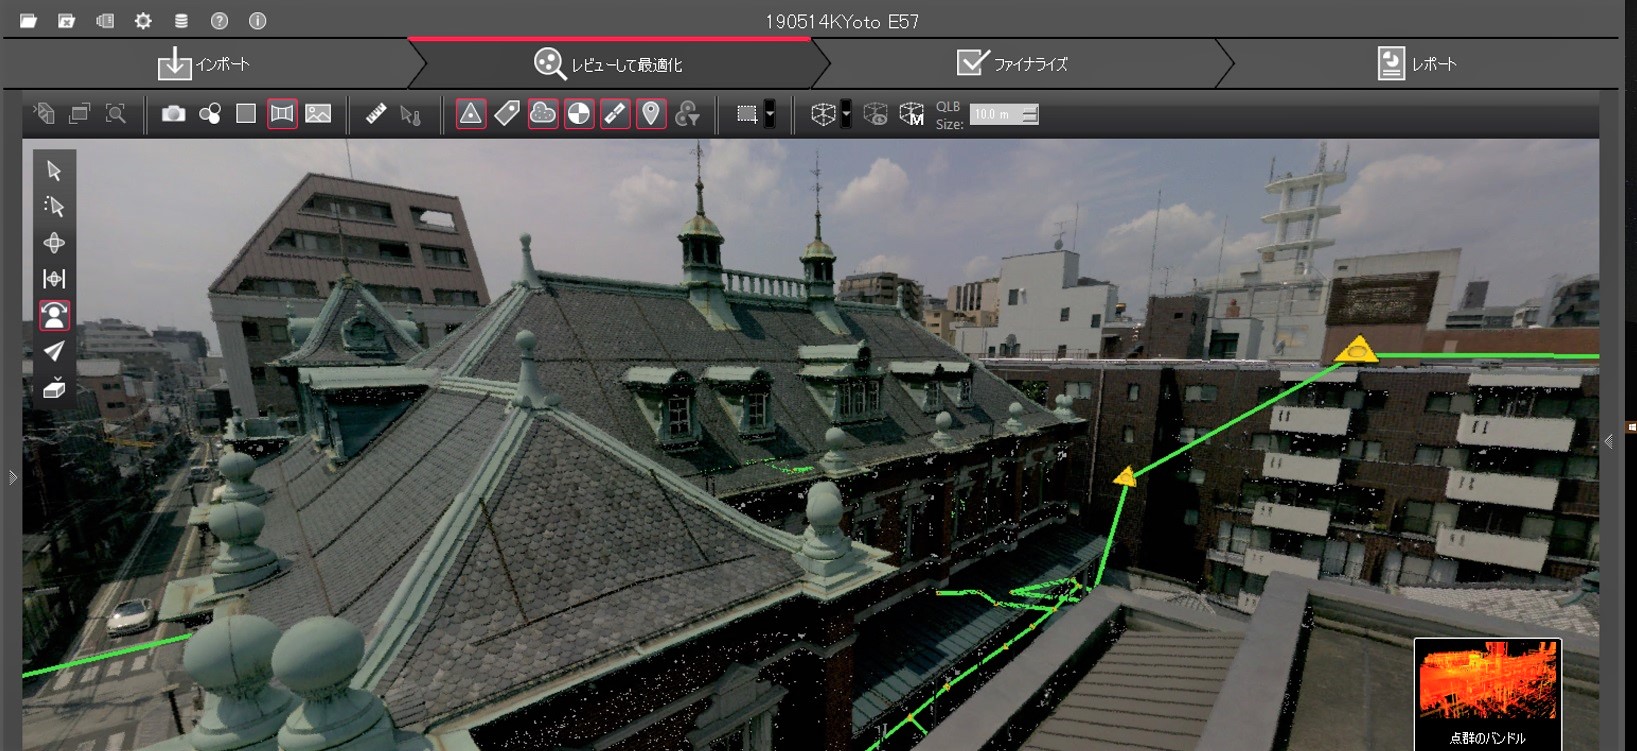 Point Cloud Data of the Kyoto Cultural Museum Acquired with BLK360